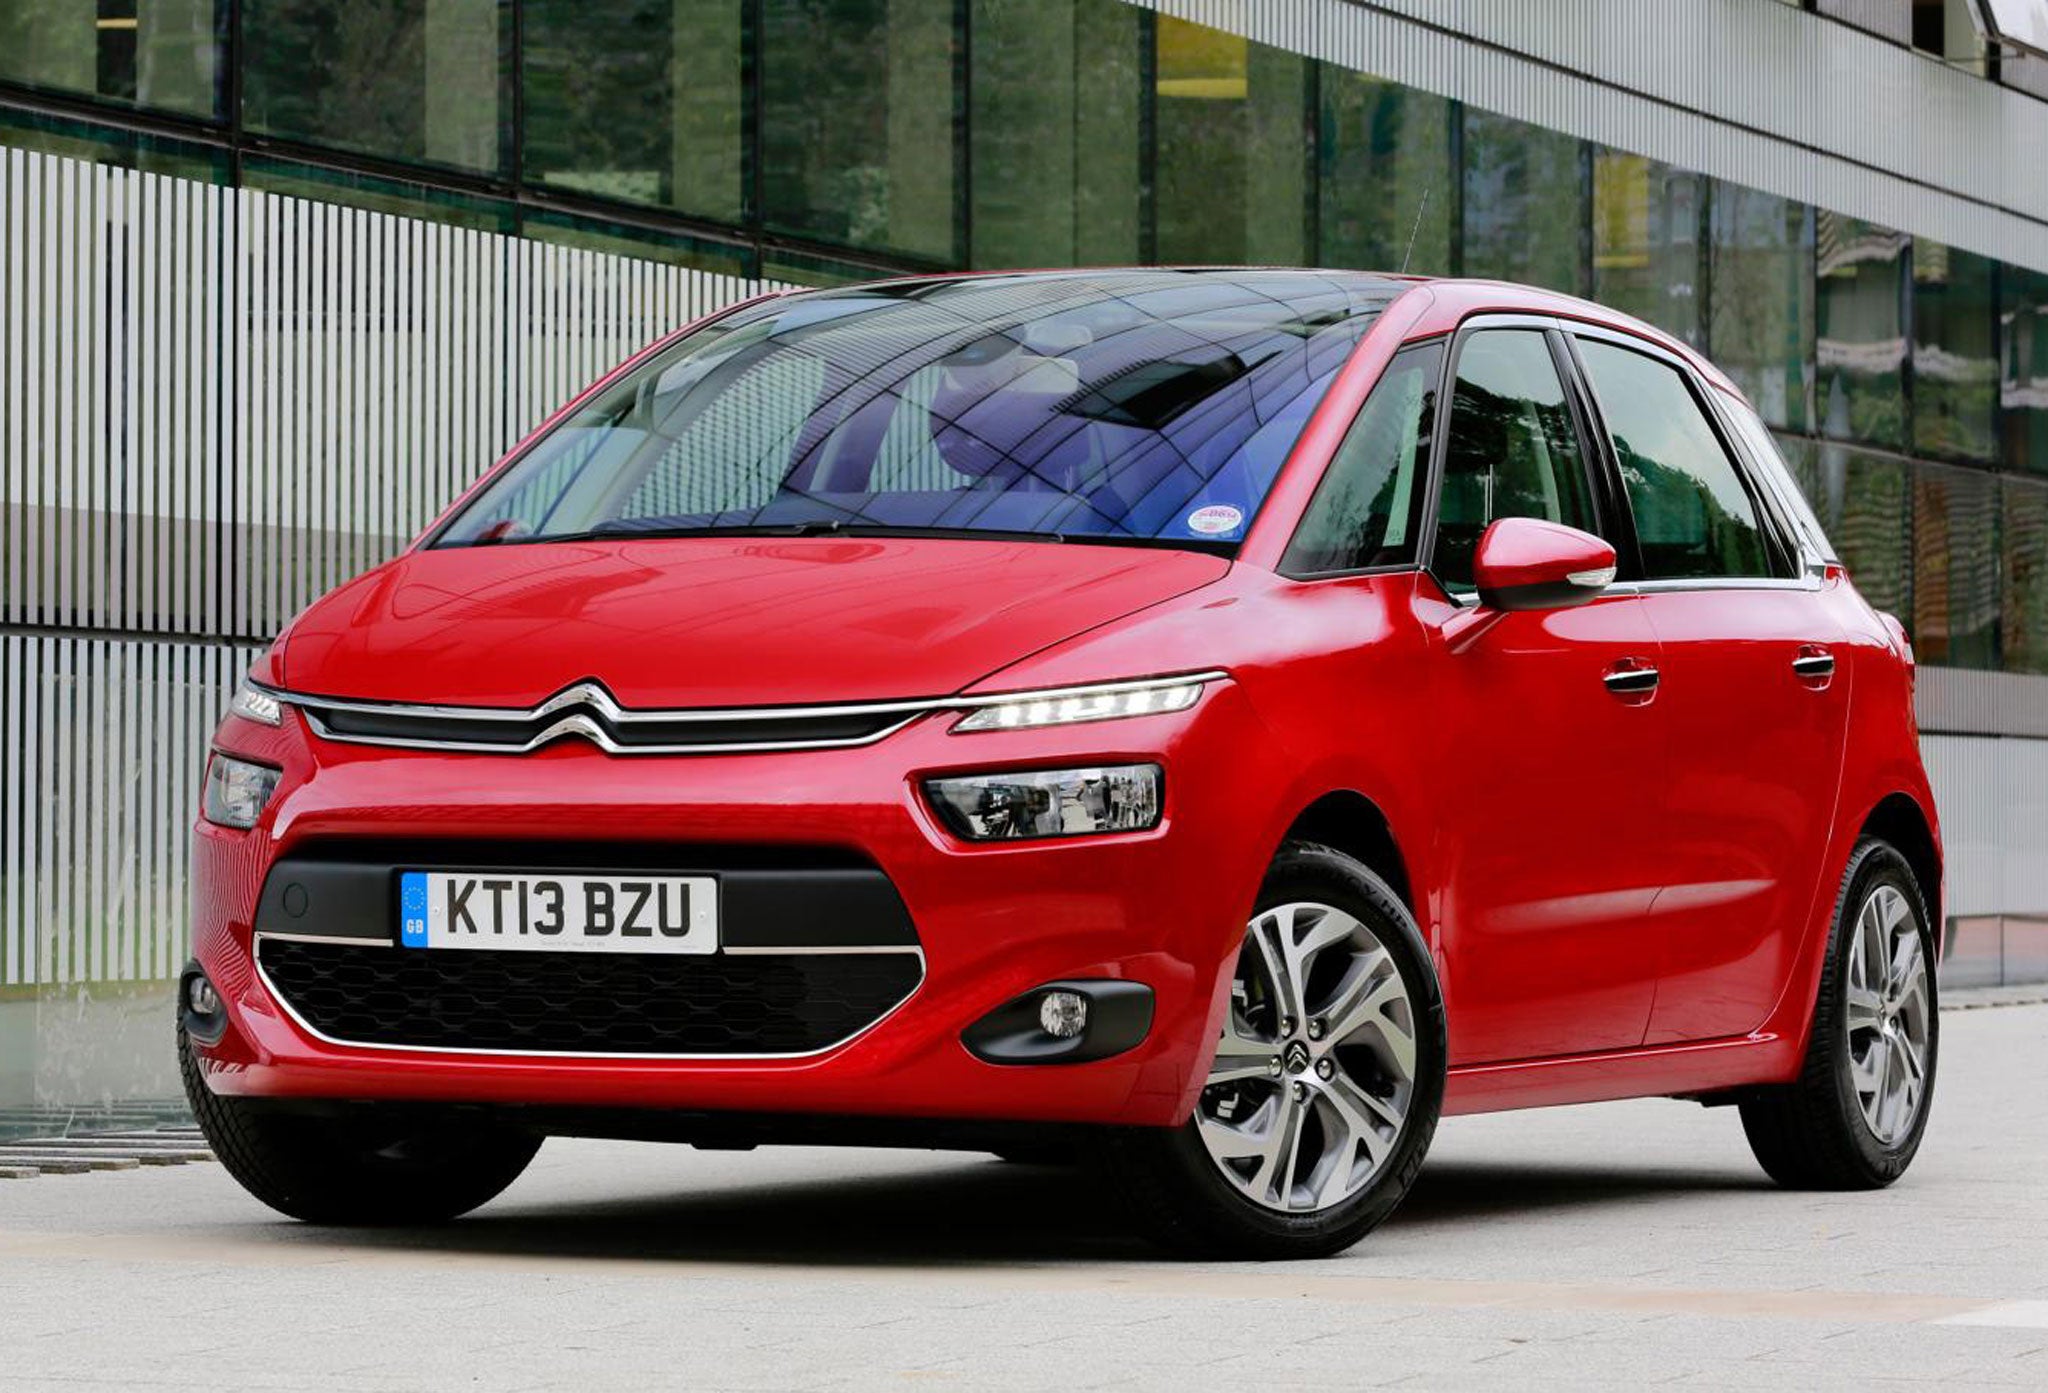 Motoring review: Citroën C4 Picasso 1.6 e-HDi VTR+, The Independent